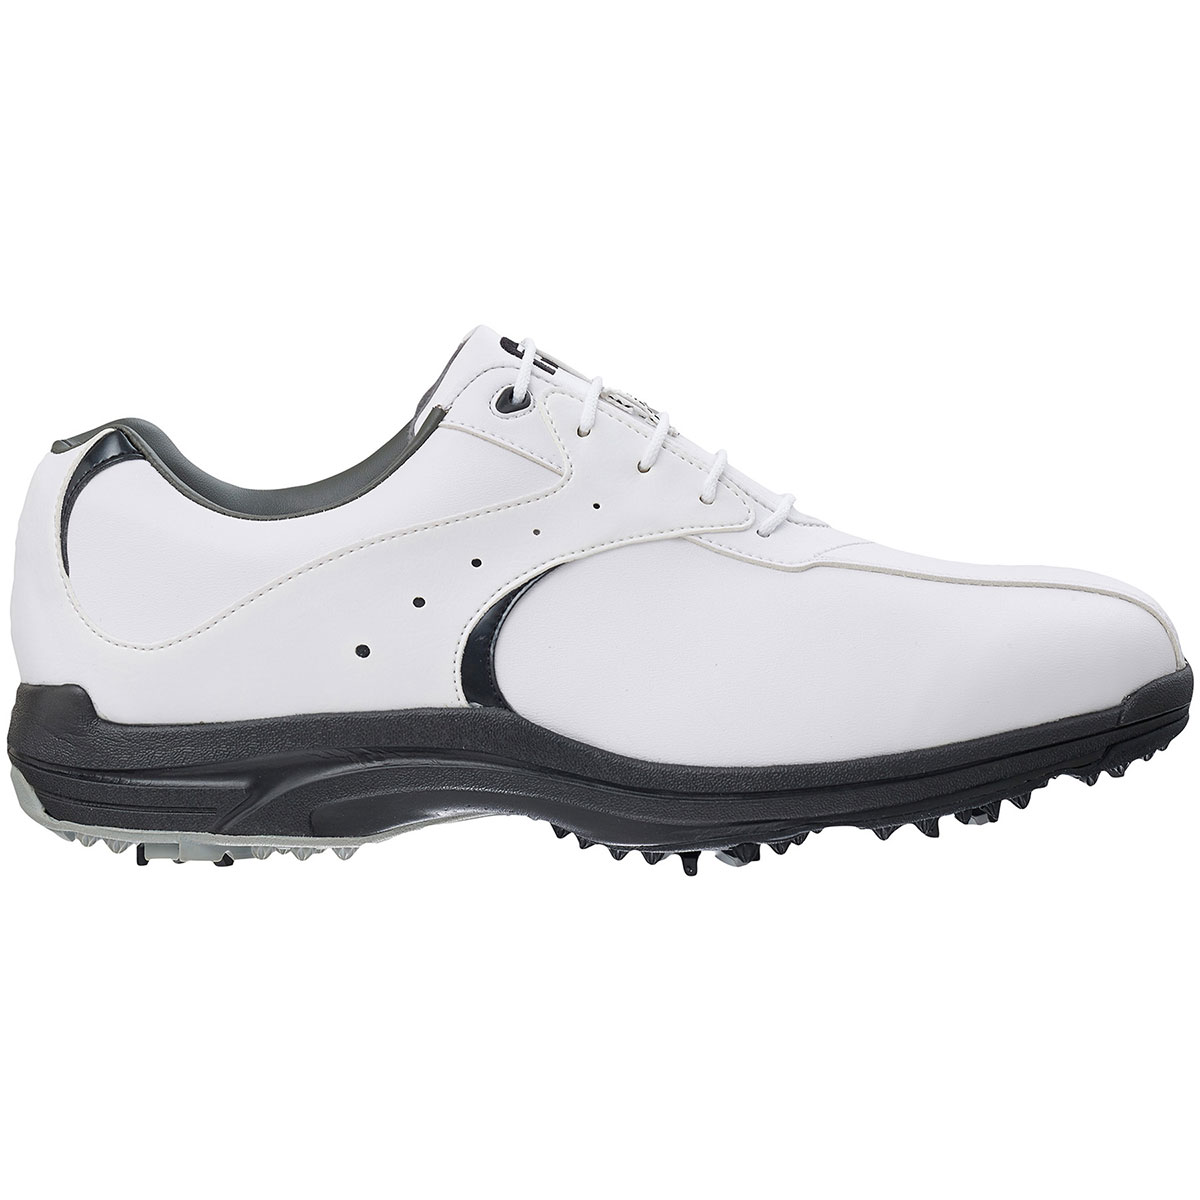 FootJoy GreenJoys Shoes from american golf